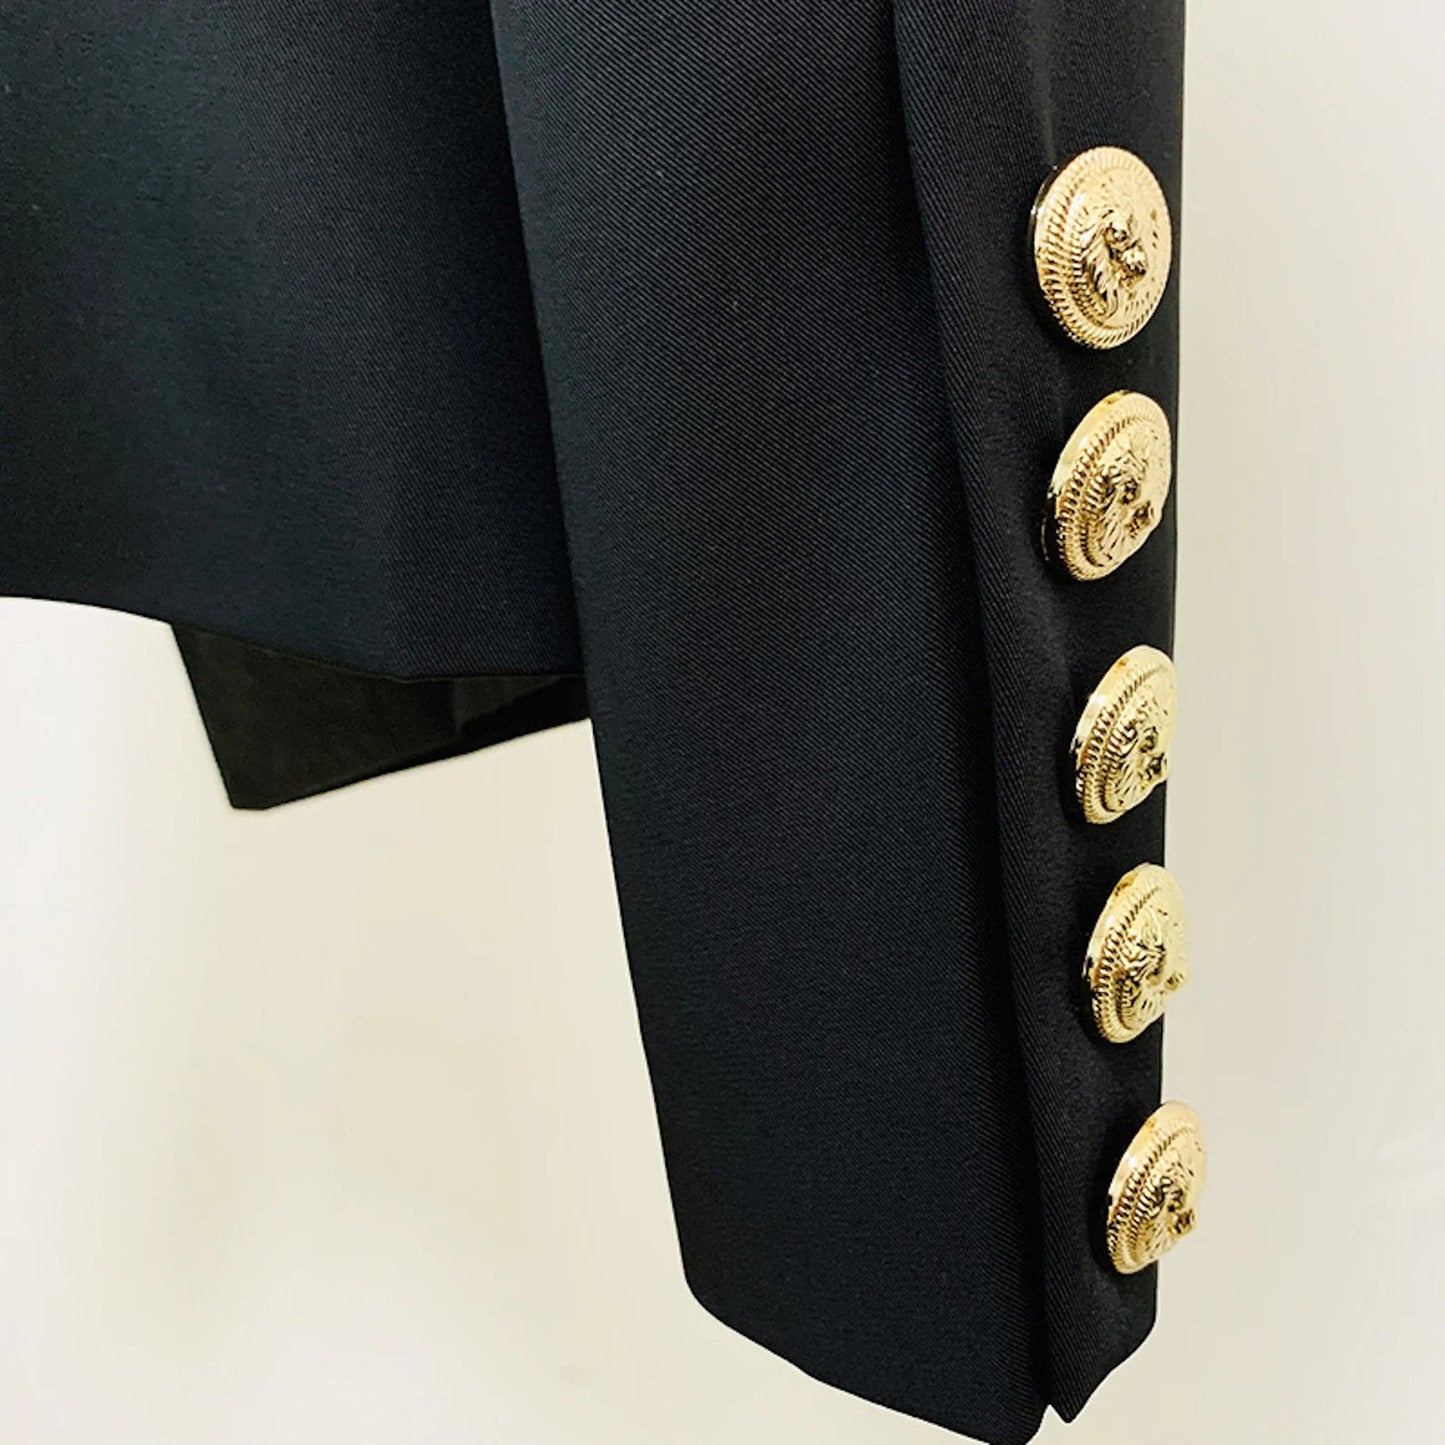 Women's Luxury Faux Leather Collar Blazer Golden Lion Buttons Black Quick International Service!  Women's Luxury Faux Leather Collar Blazer Golden Lion Buttons Black, can wear it for College Inaugurations, Ceremony and Official use. The comfort of our ladies tailored suits are unsurpassed, as is the confidence it can provide its wearer in knowing that they are looking at their absolute best.